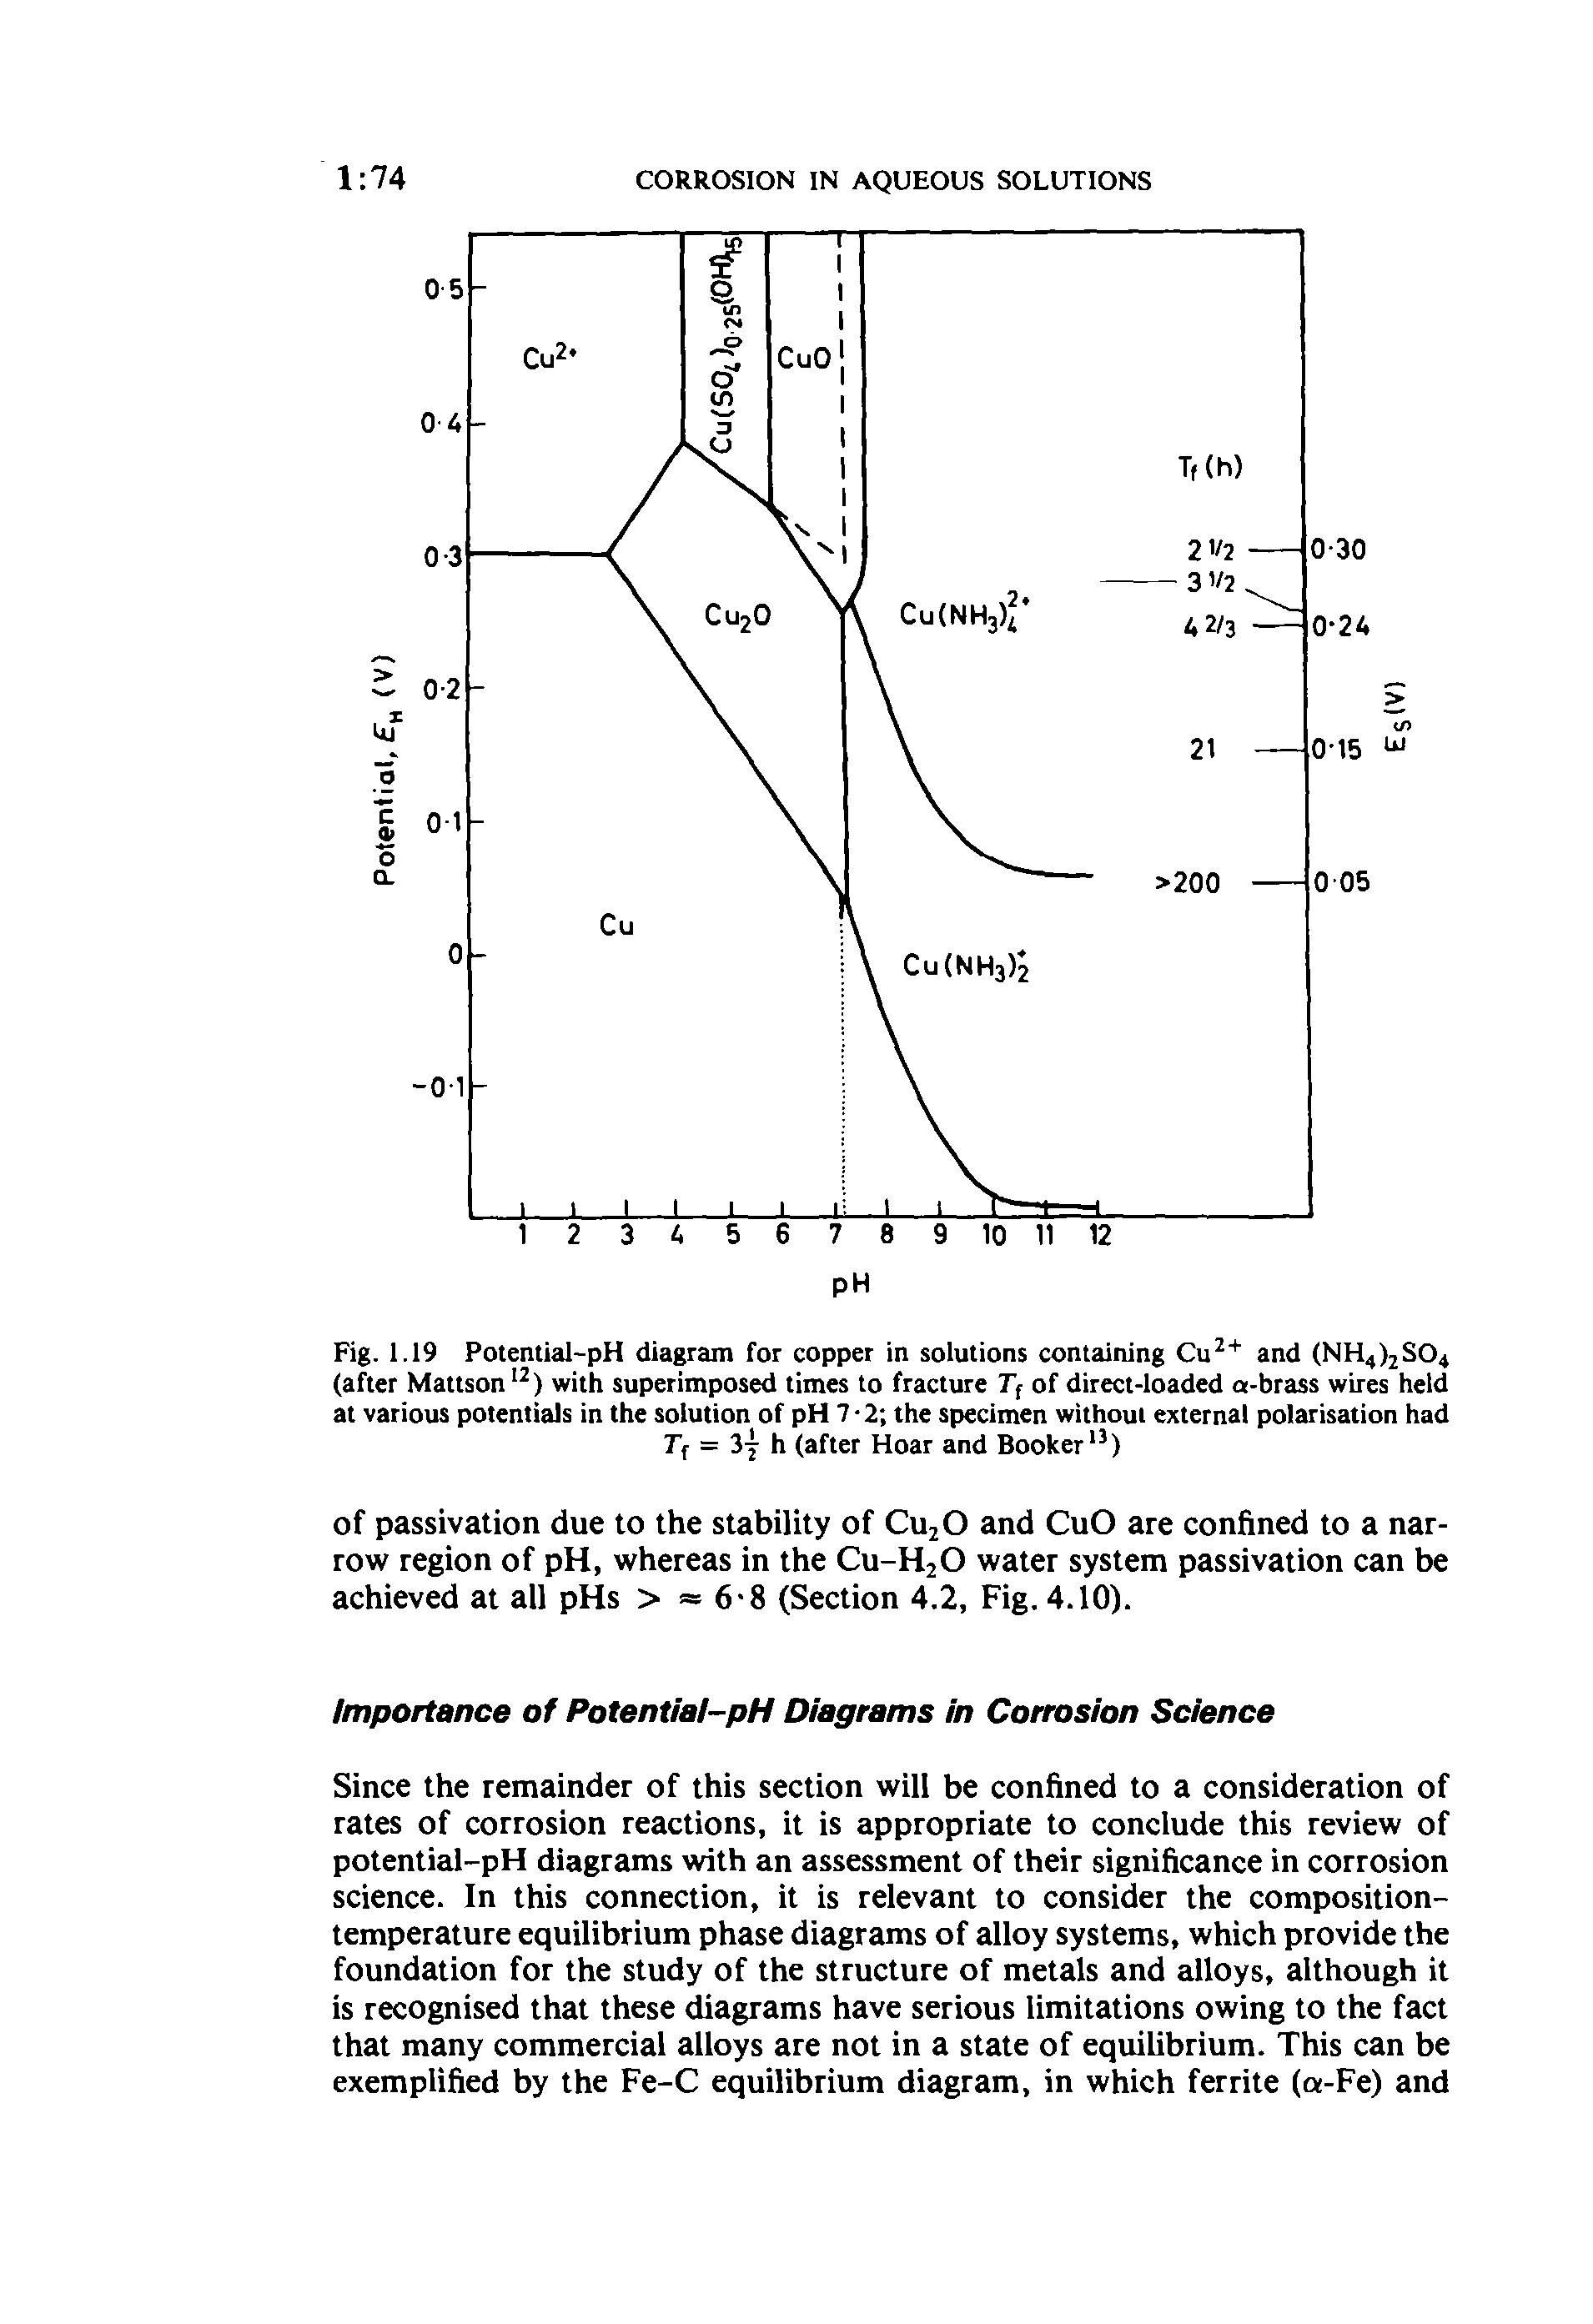 Fig. 1.19 Potential-pH diagram for copper in solutions containing and (NH4>2S04 (after Mattson ) with superimposed times to fracture Tf of direct-loaded a-brass wires held at various potentials in the solution of pH 7-2 the specimen without external polarisation had Ff = 3y h (after Hoar and Booker S)...